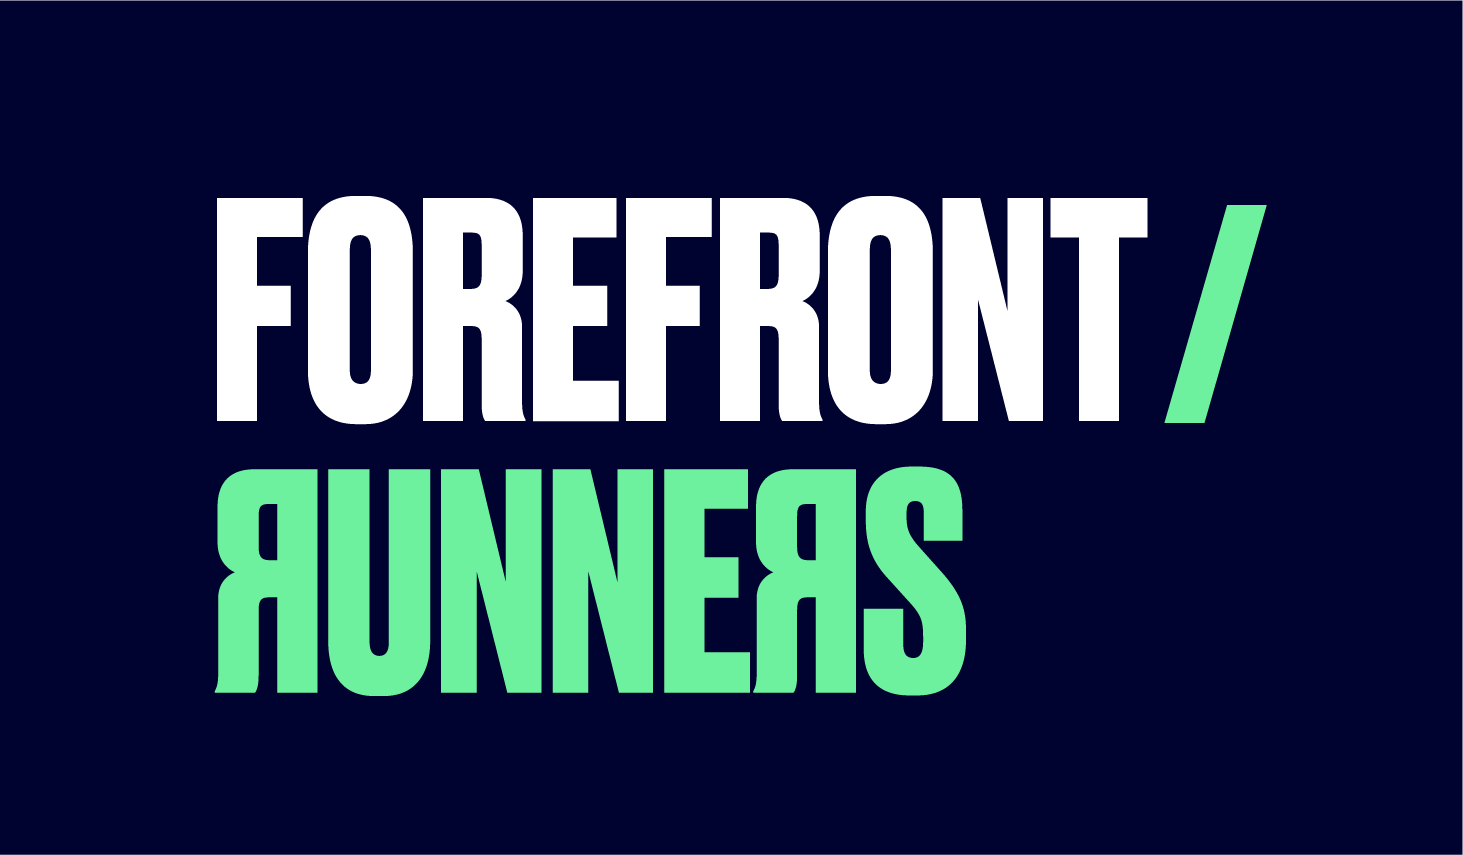 Forefront Runners